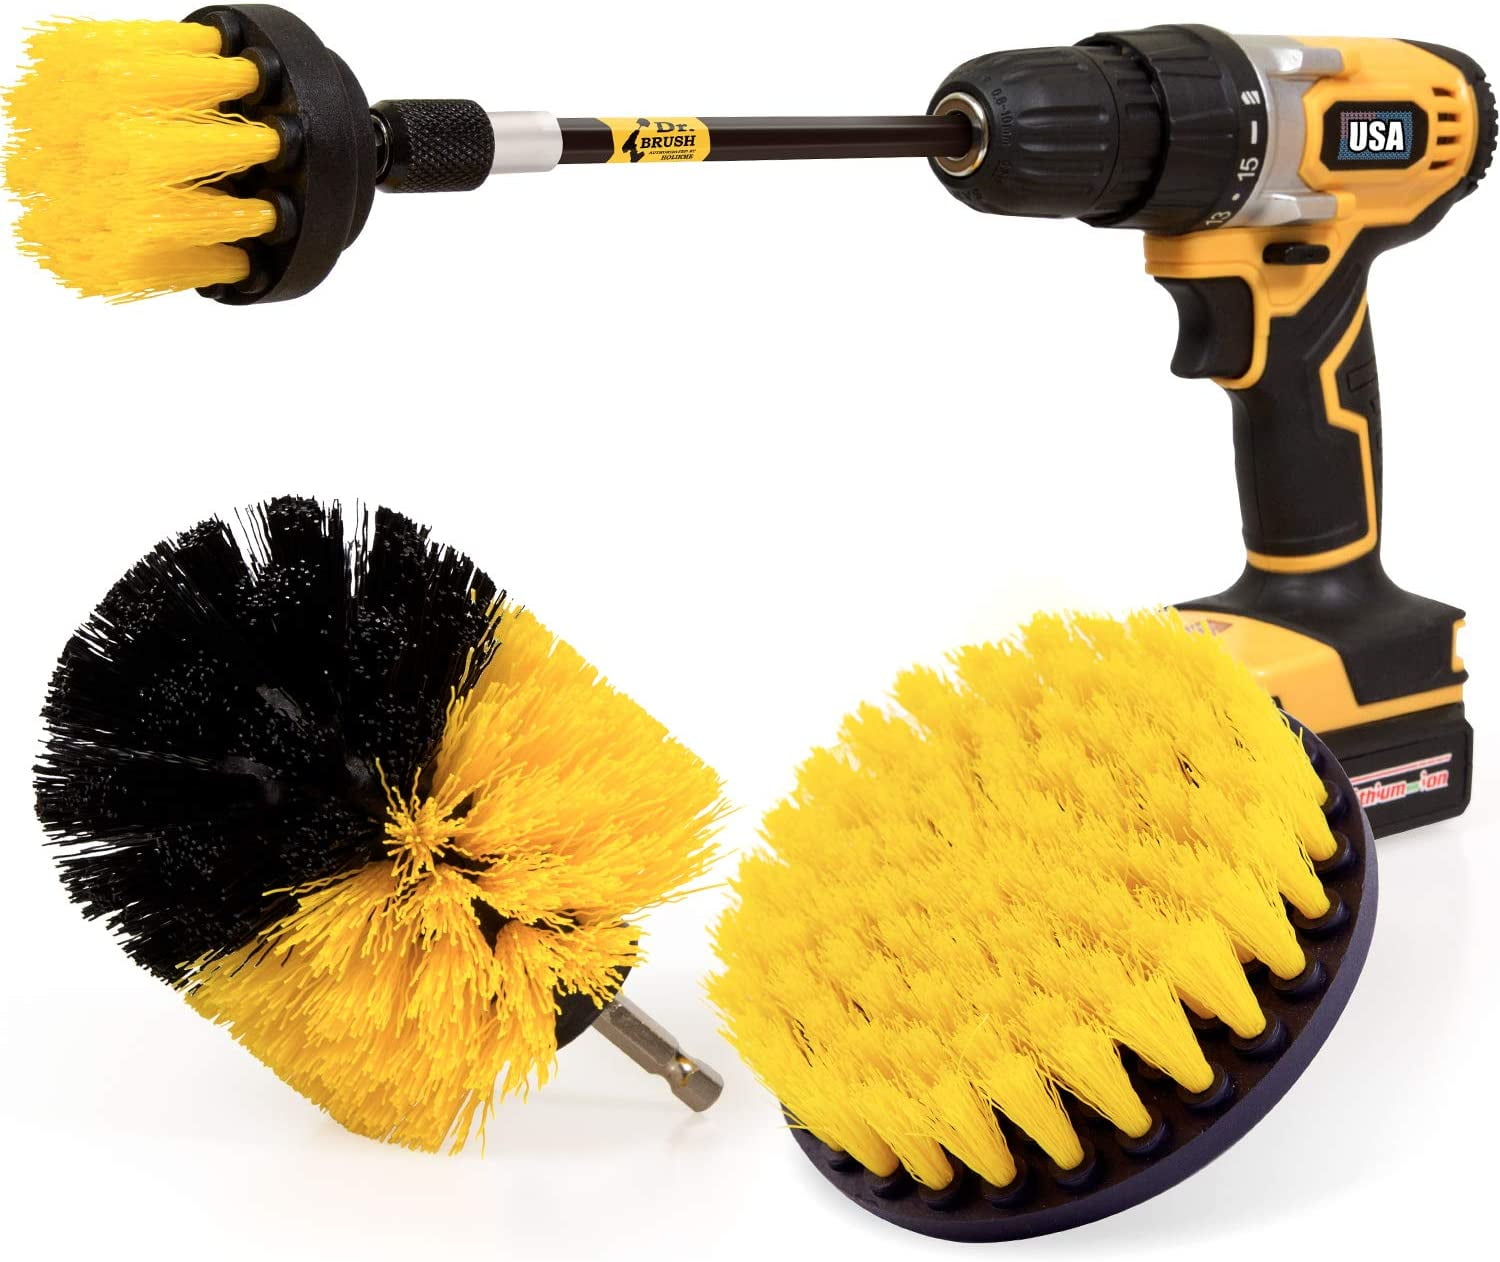 Drill Brush, Power Scrubber Cleaning Brush Attachment Set All